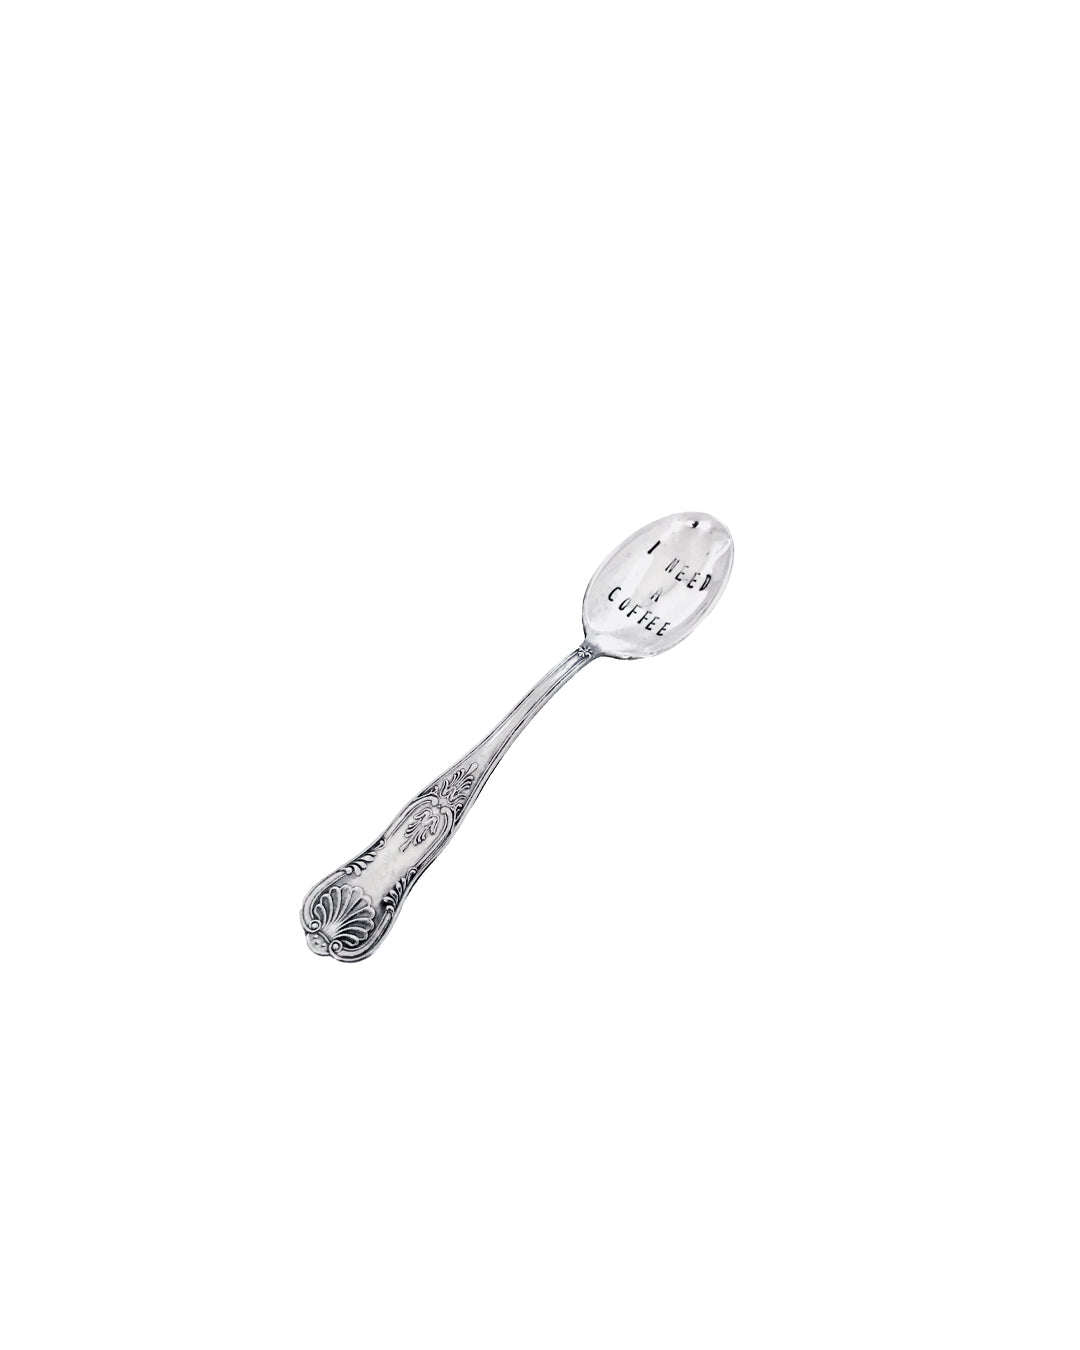 Stamped silver coffee spoon - Ohyeahspoon